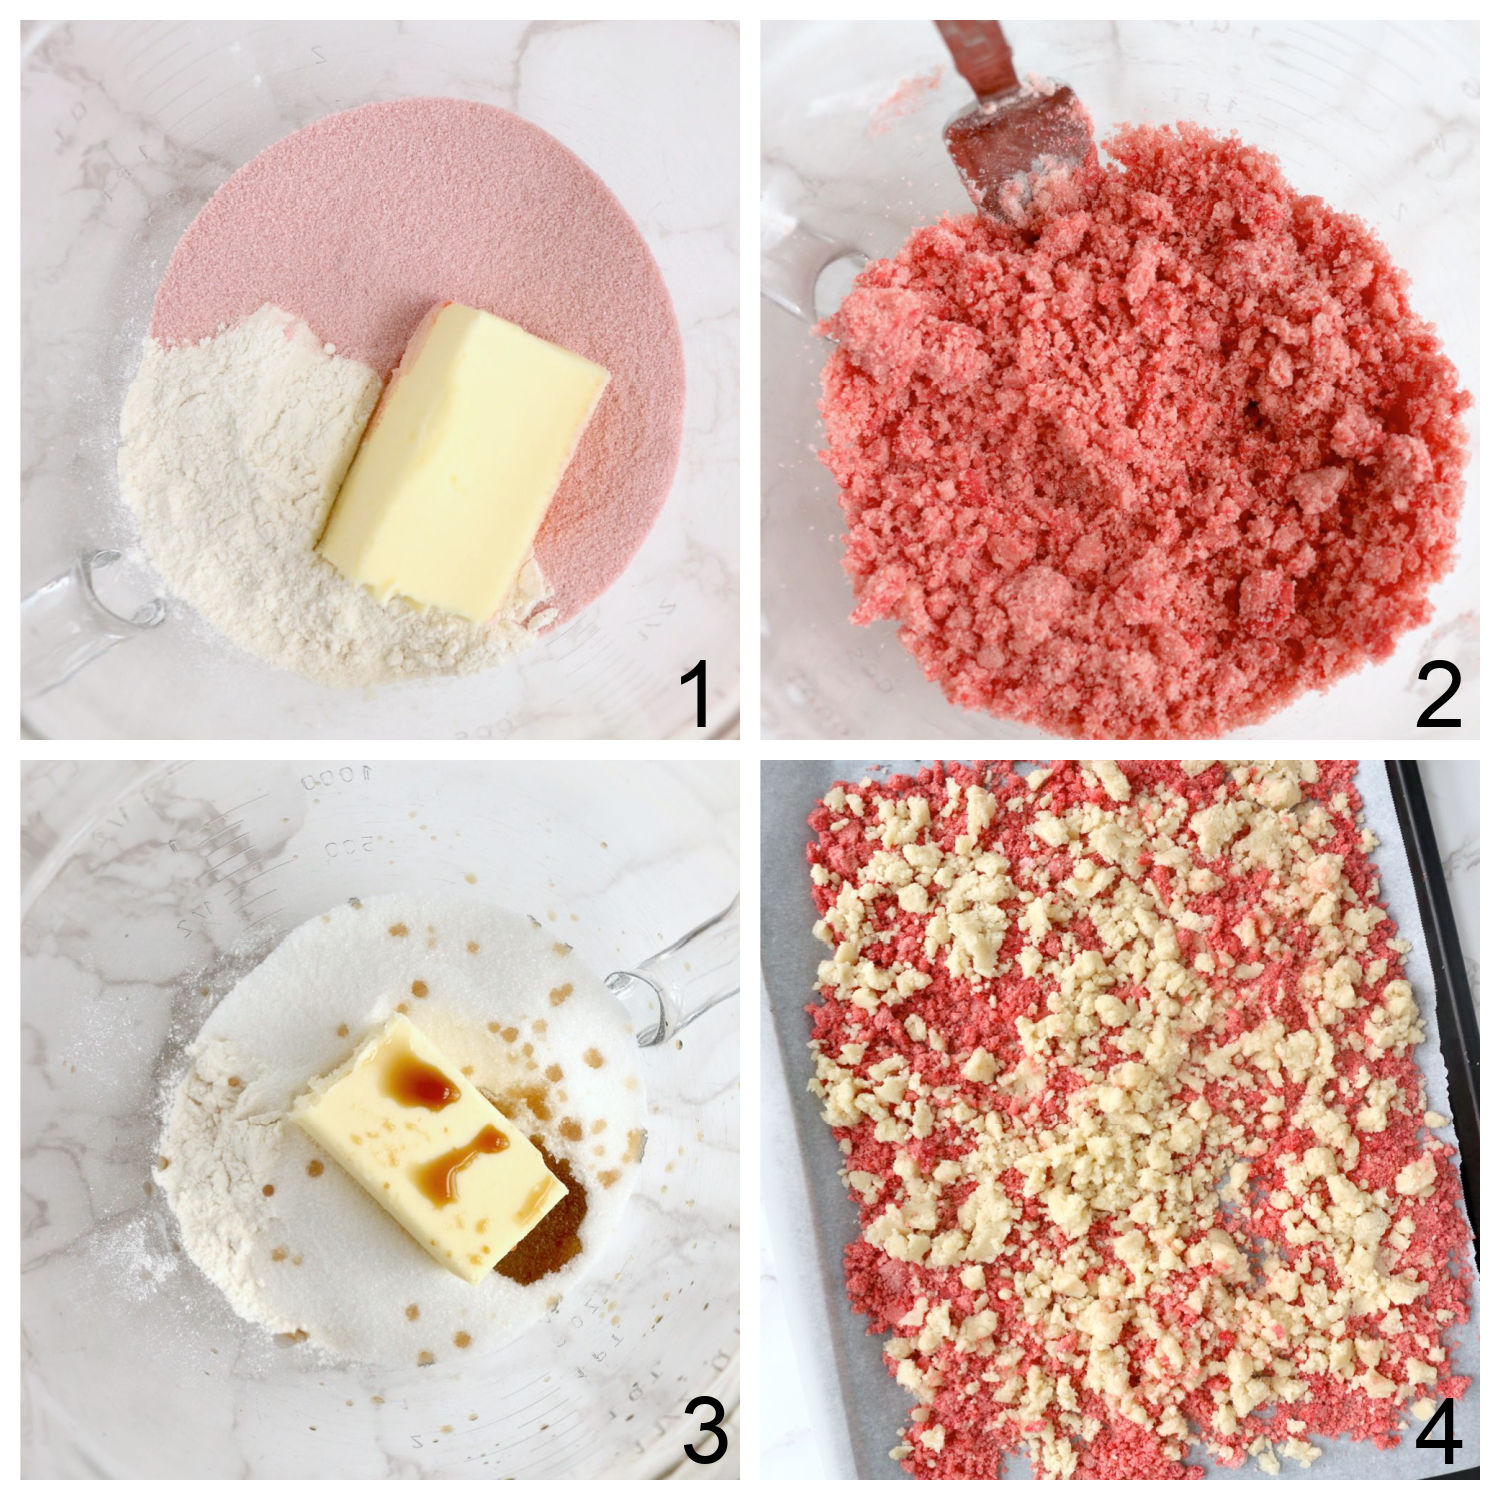 steps for making strawberry crumble topping